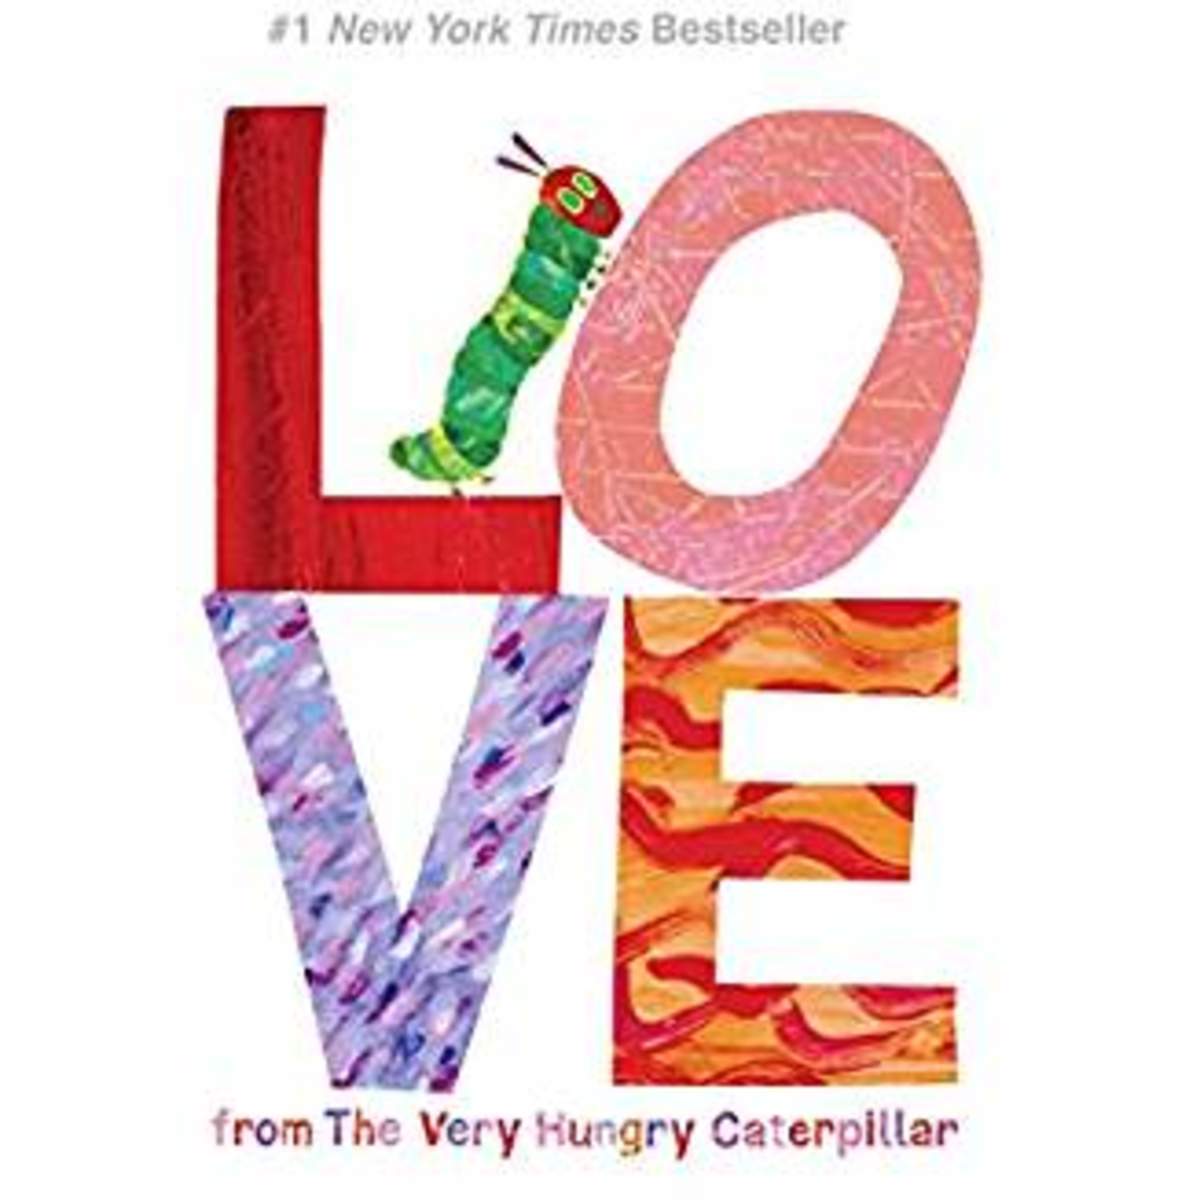 Love From the Very Hungry Caterpillar by Eric Carle